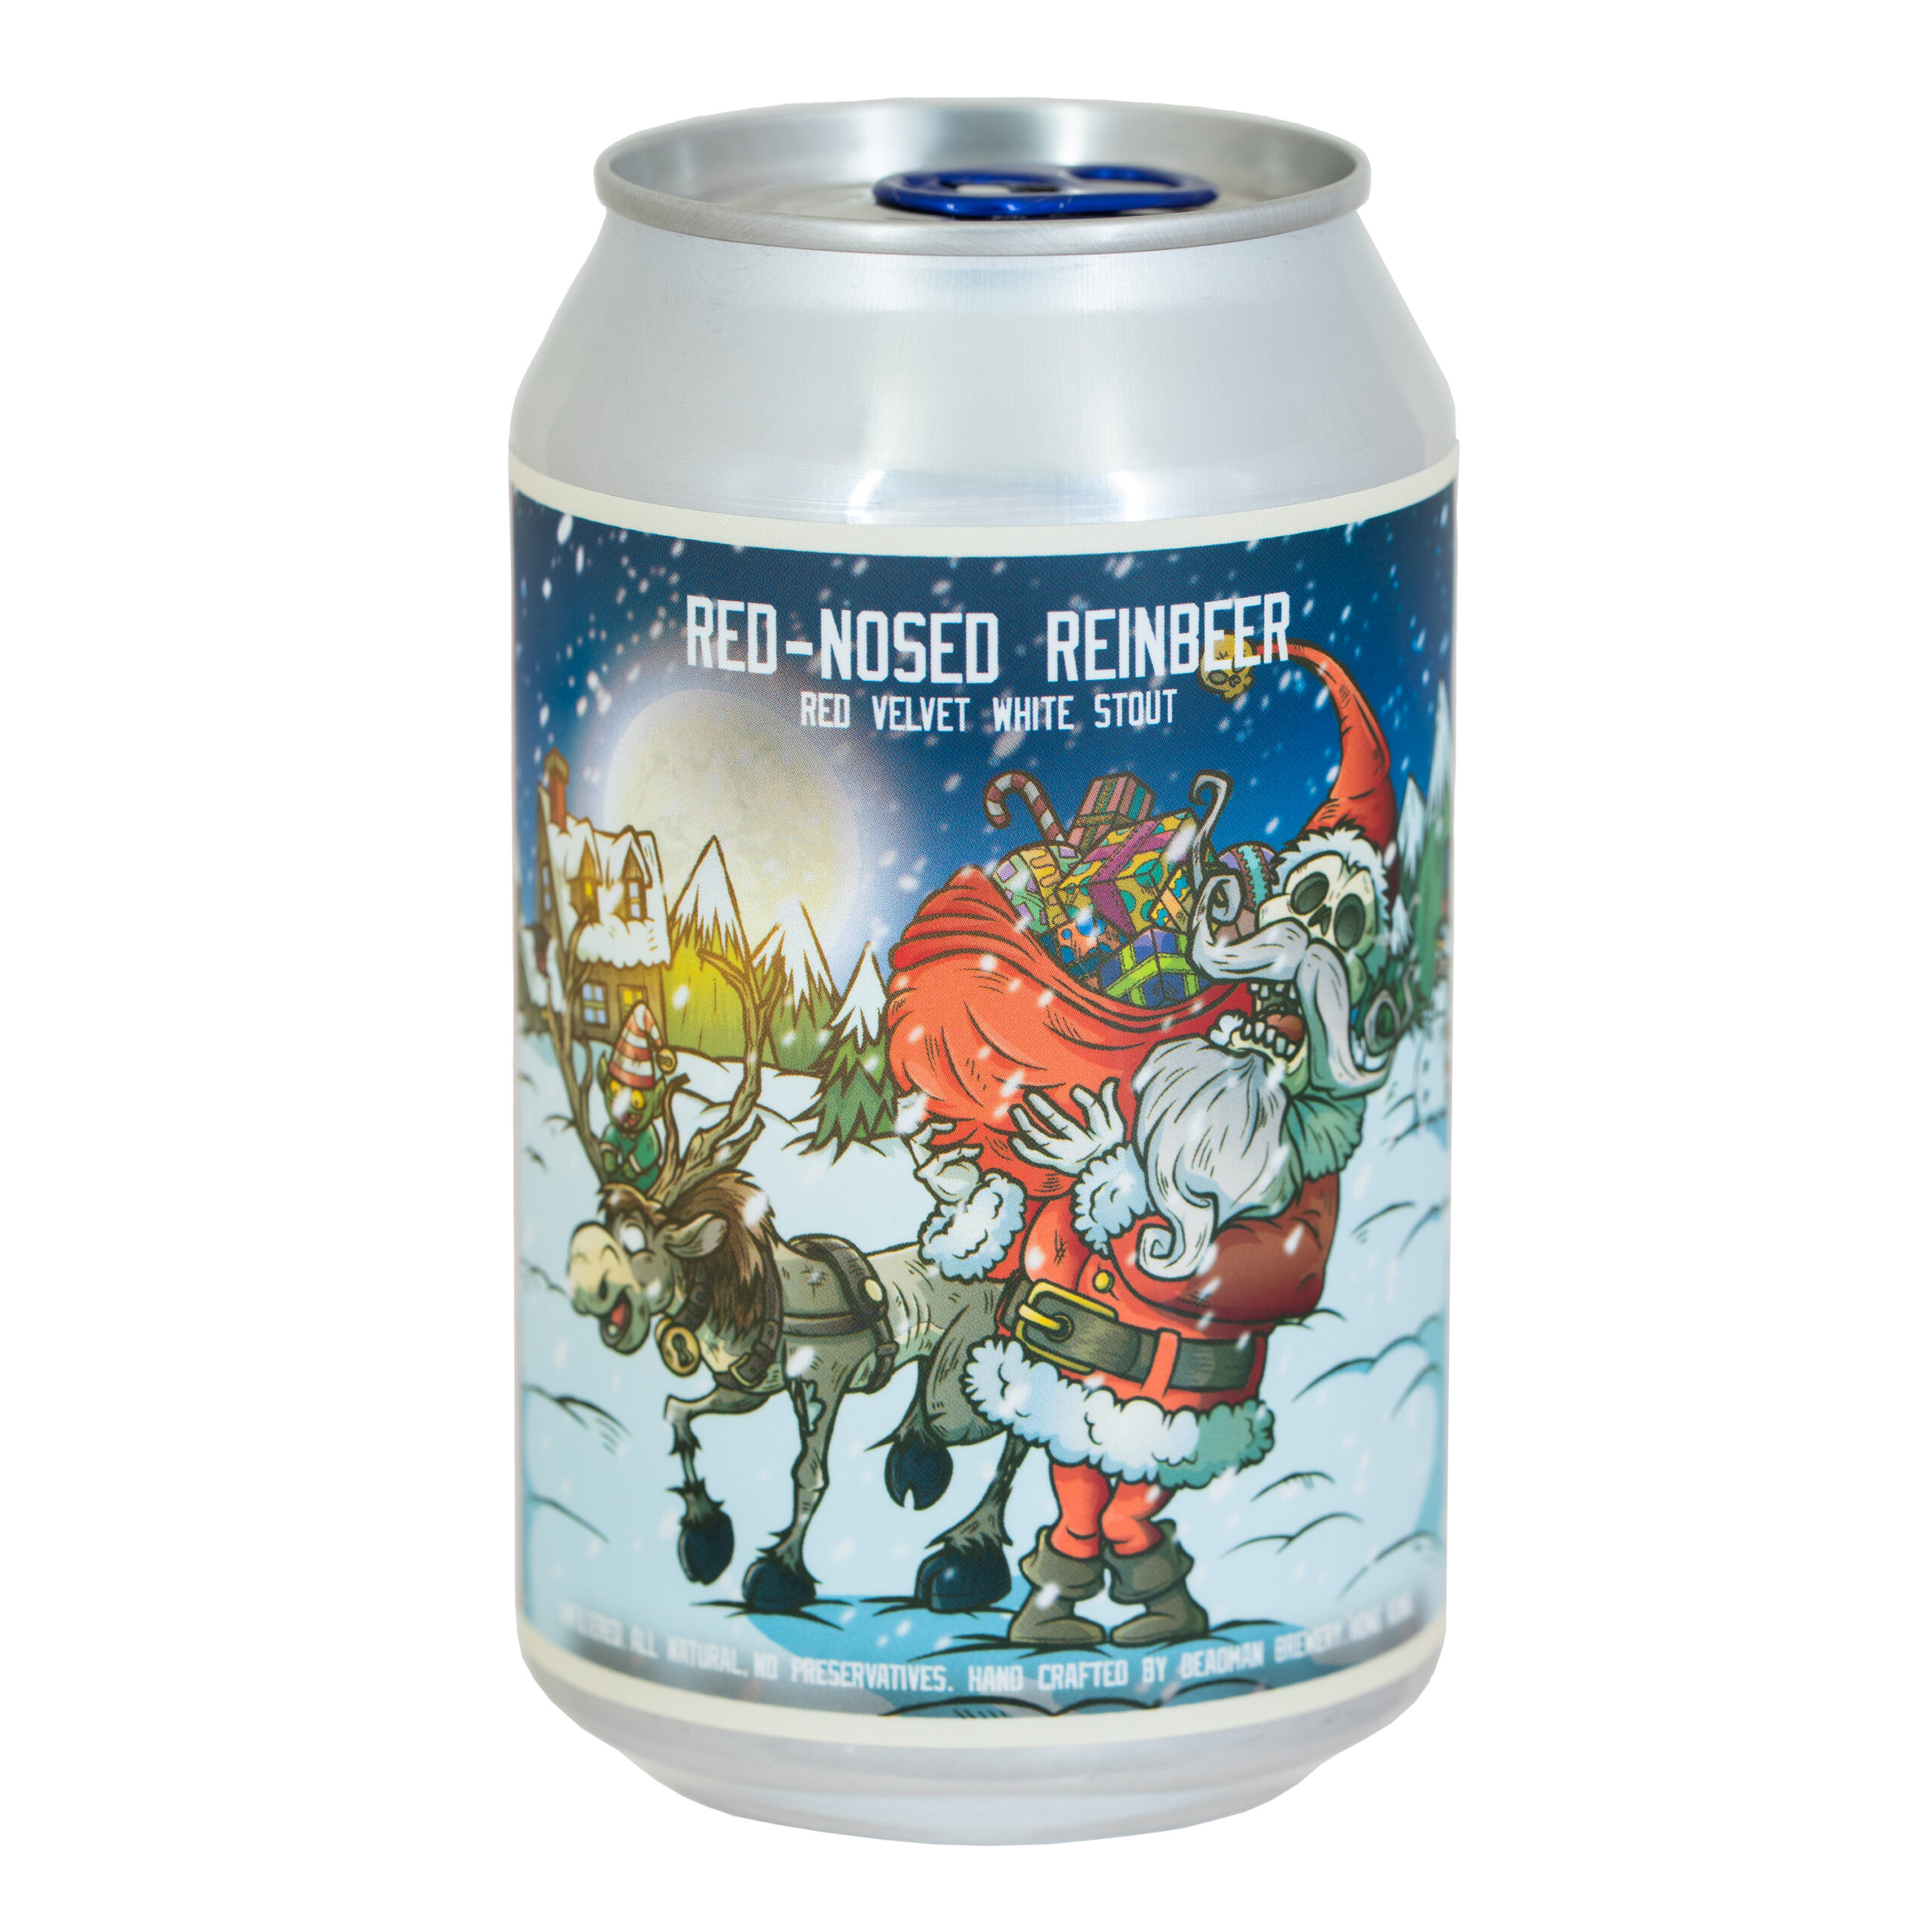 Red-Nosed Reinbeer (4 Cans)